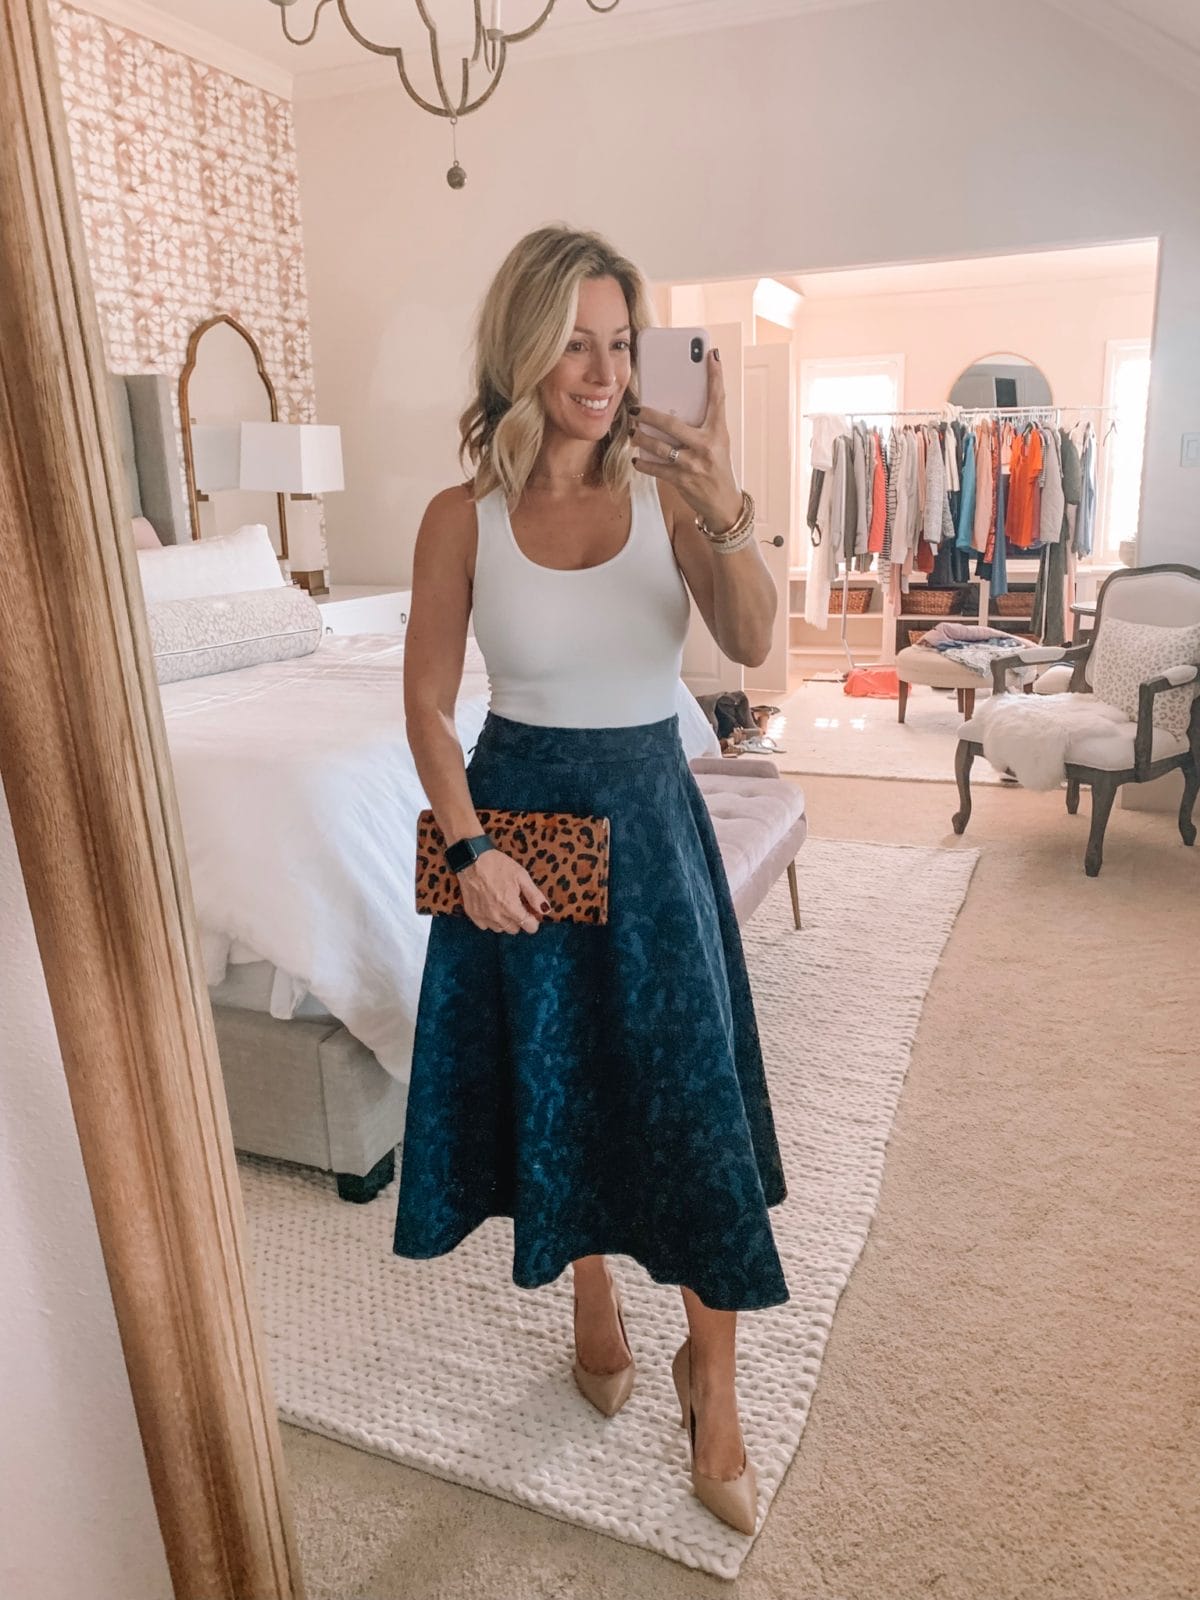 Dressing Room - white tank with blue spotted skirt with a leopard clutch